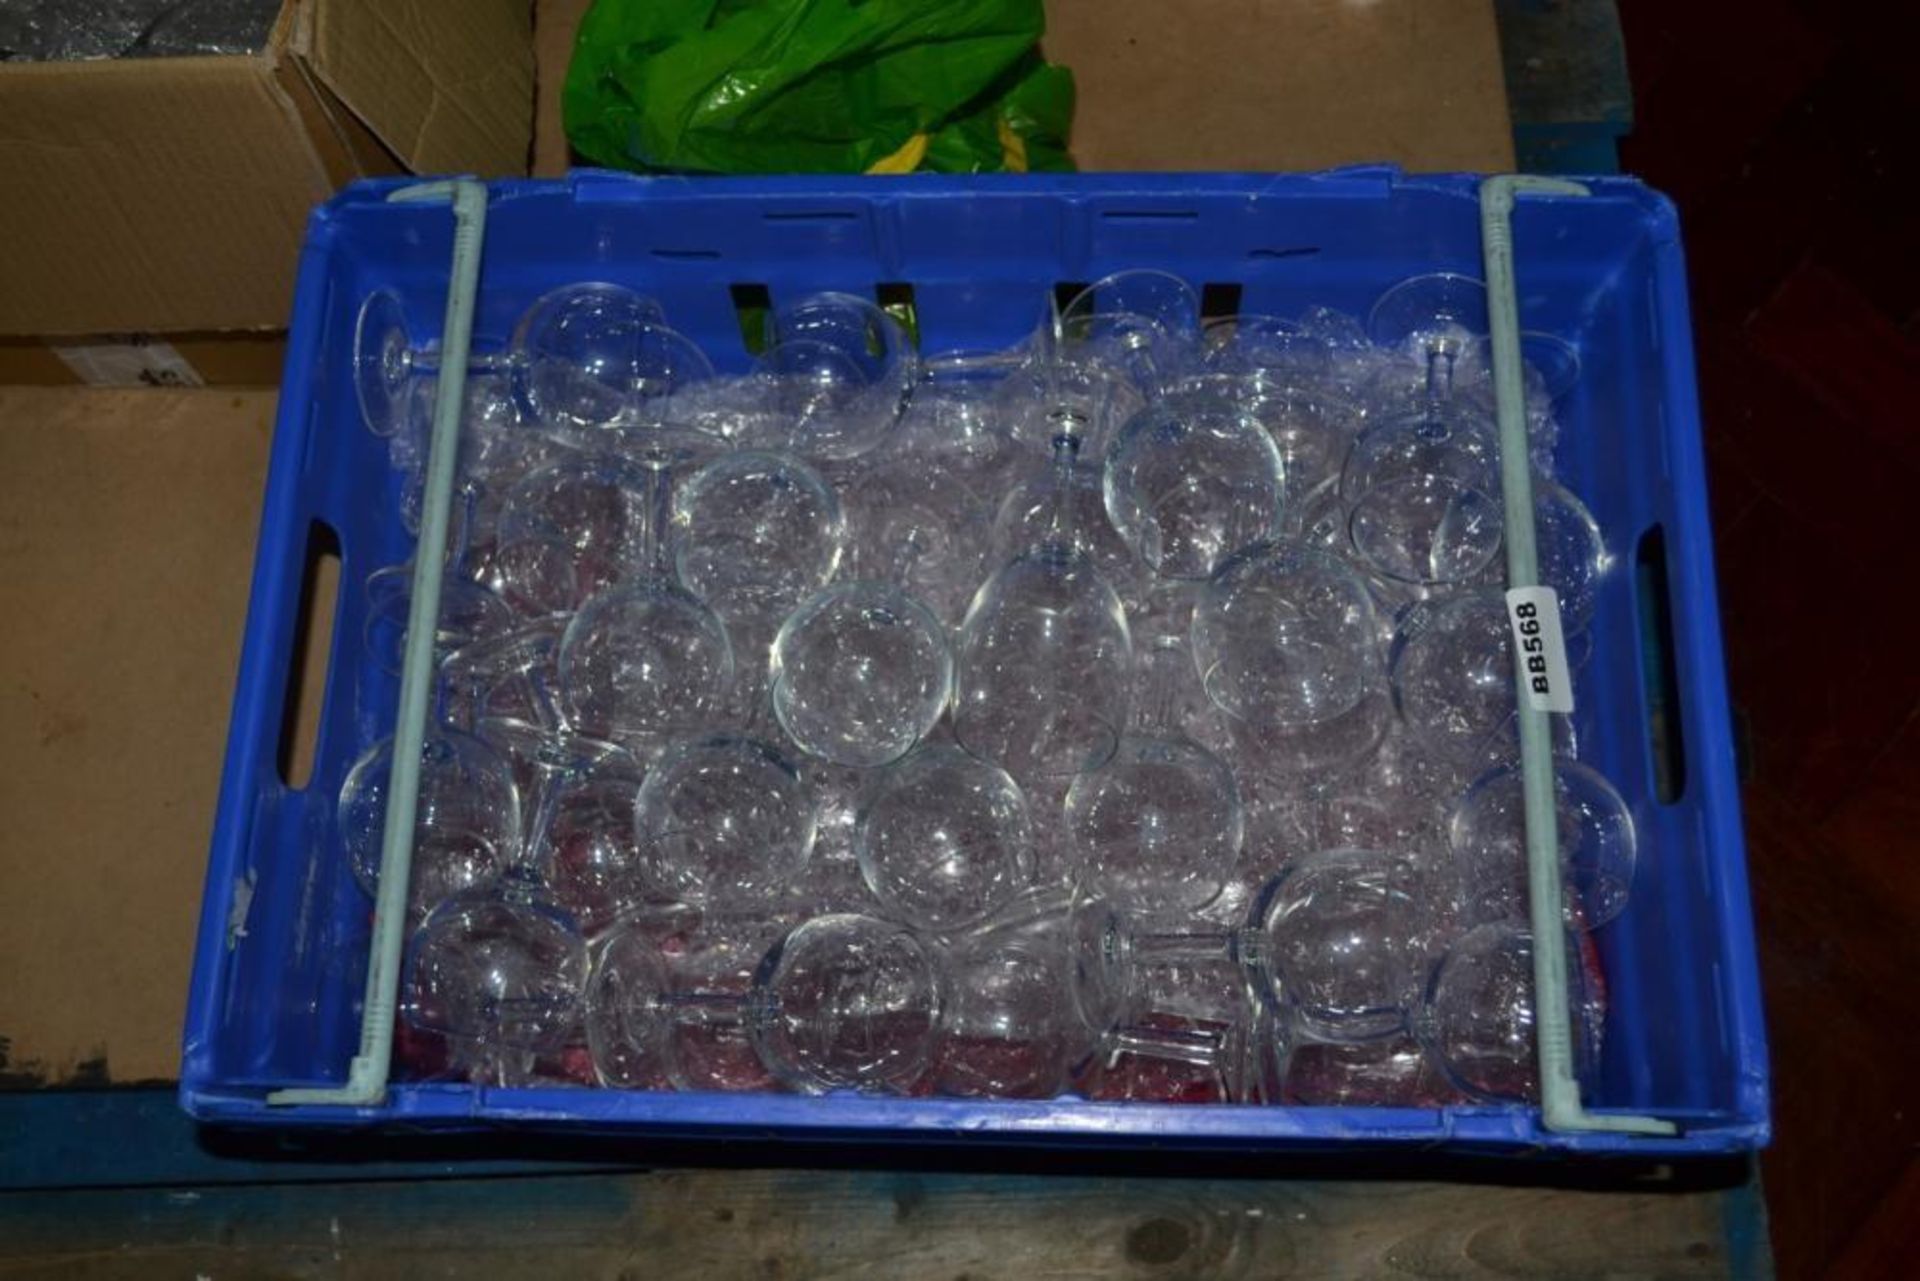 1 x Large Collection of Wine Glasses, Beer Jugs and Glassware - Includes Approx 400 Pieces - Ref BB5 - Image 10 of 13